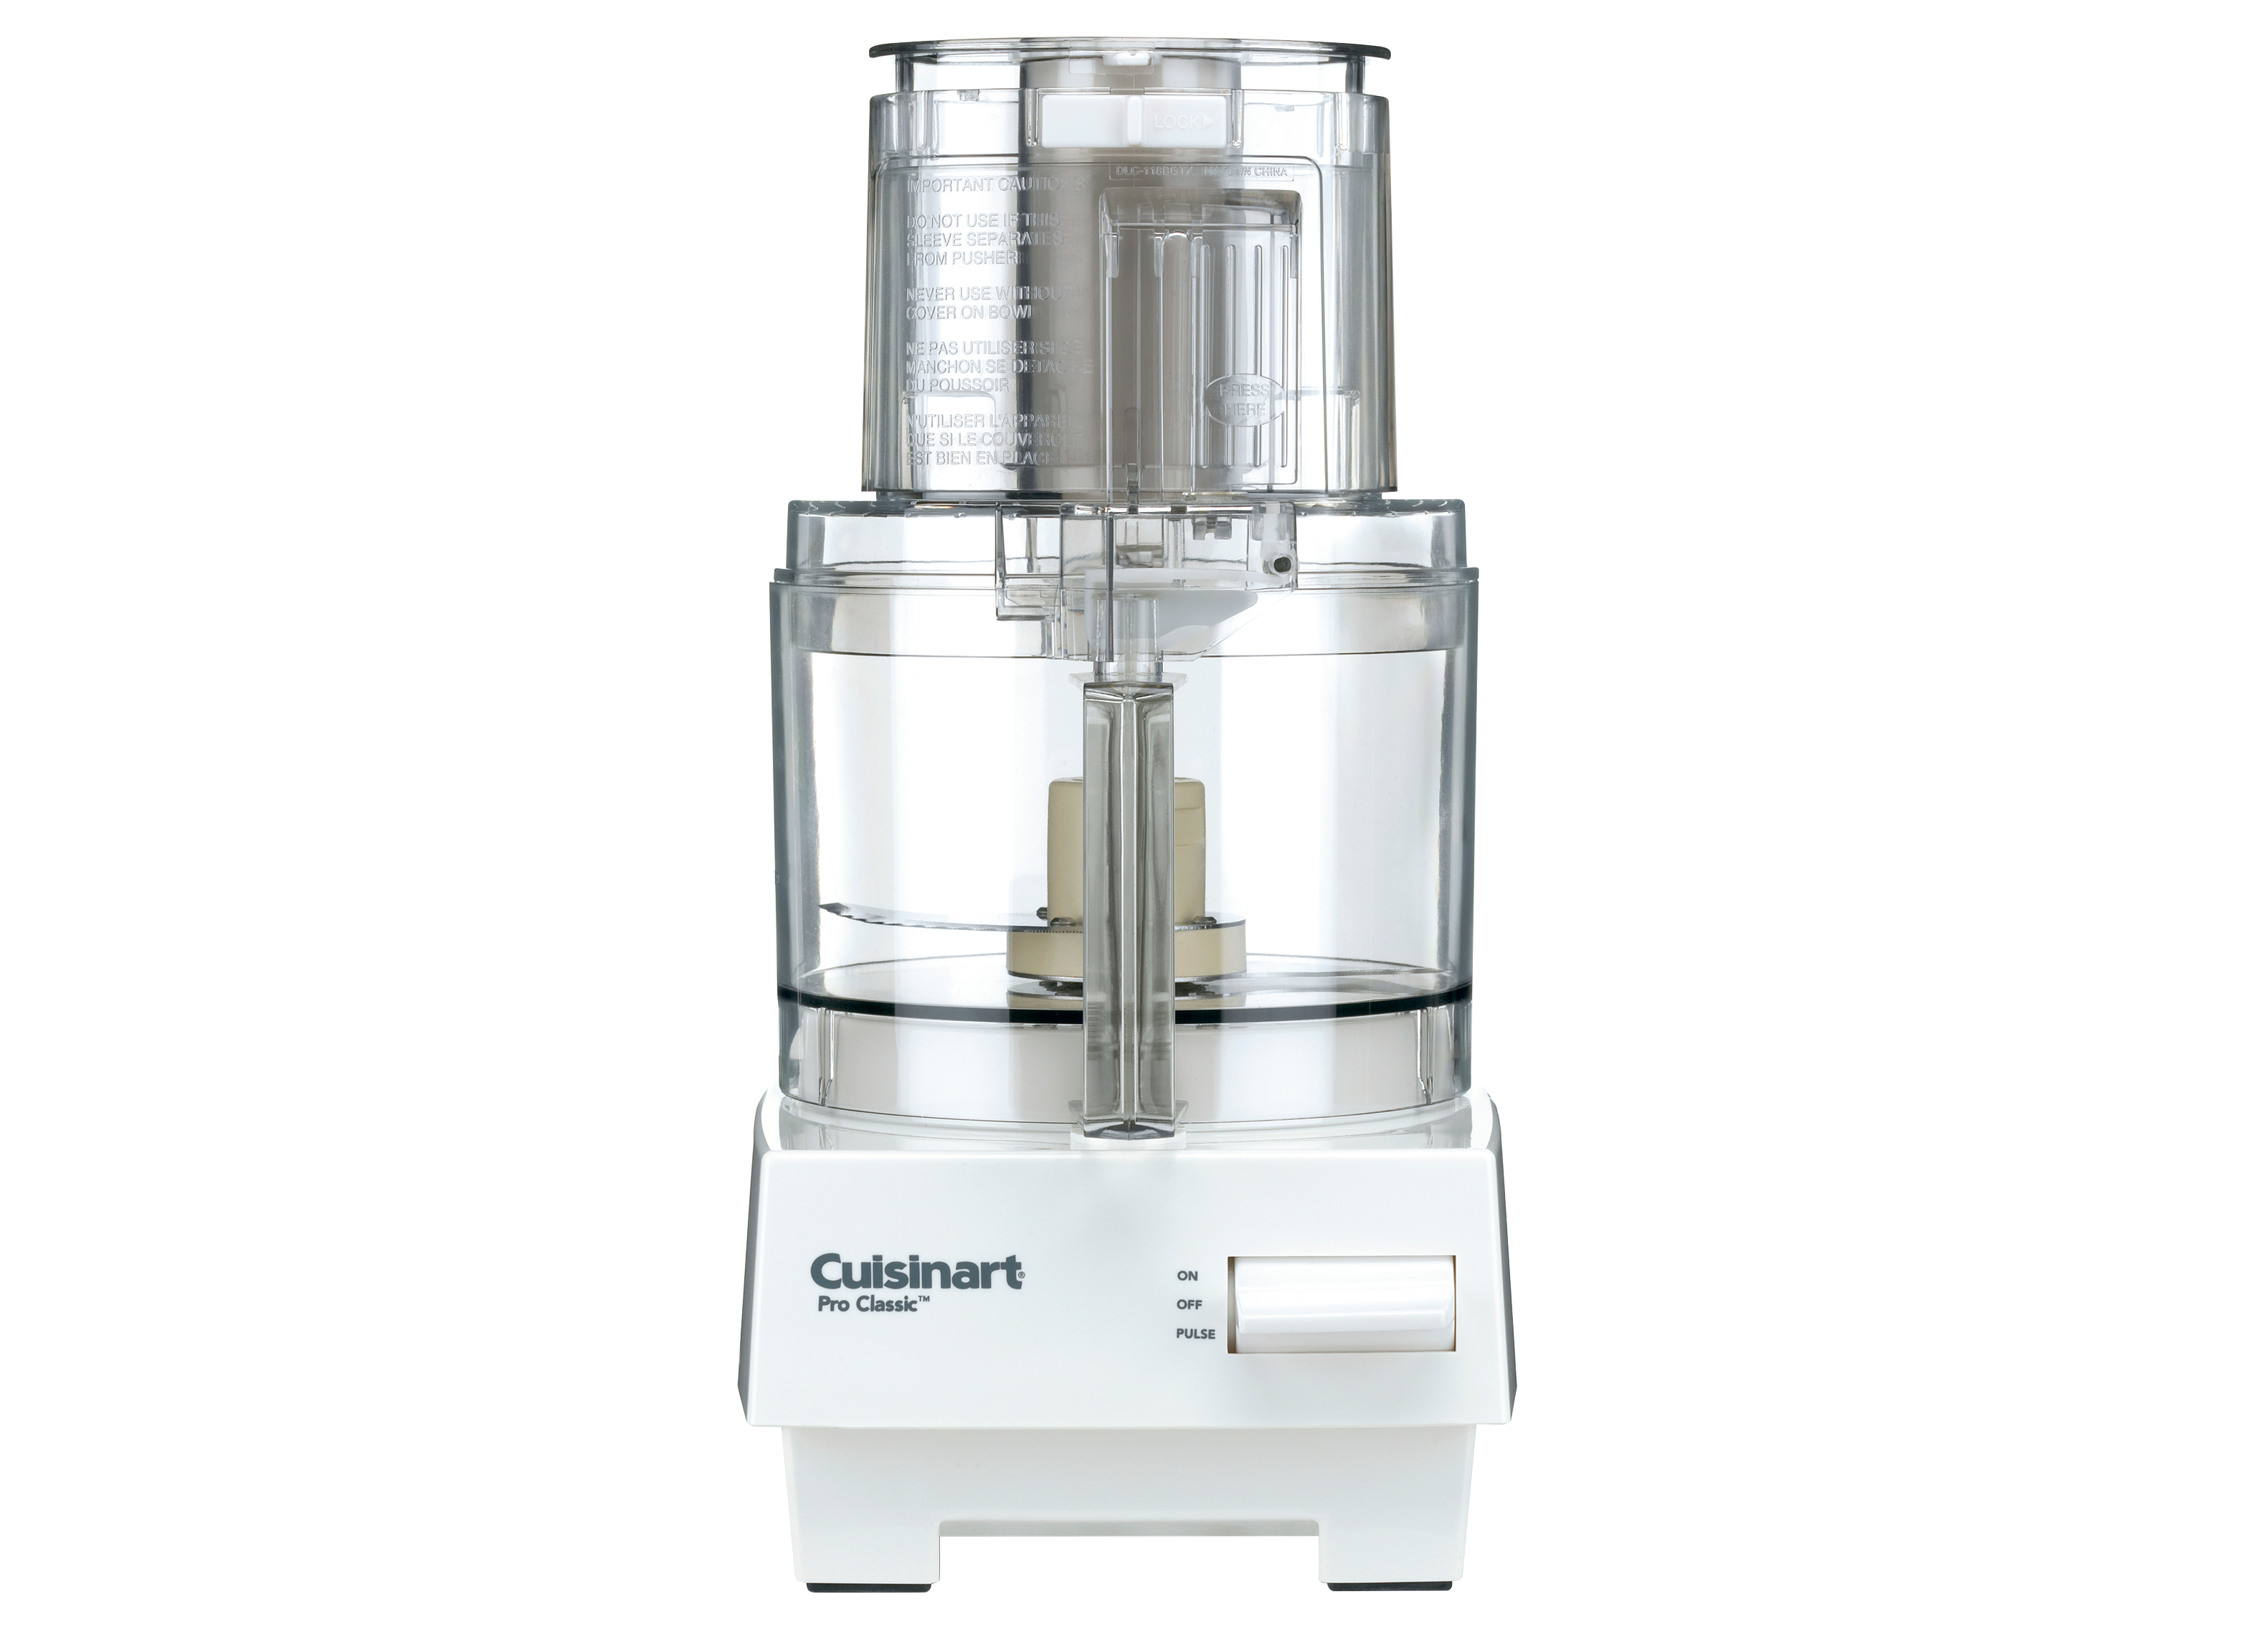 https://crdms.images.consumerreports.org/prod/products/cr/models/406340-food-processors-cuisinart-pro-classic-dlc-10sy-10029030.png